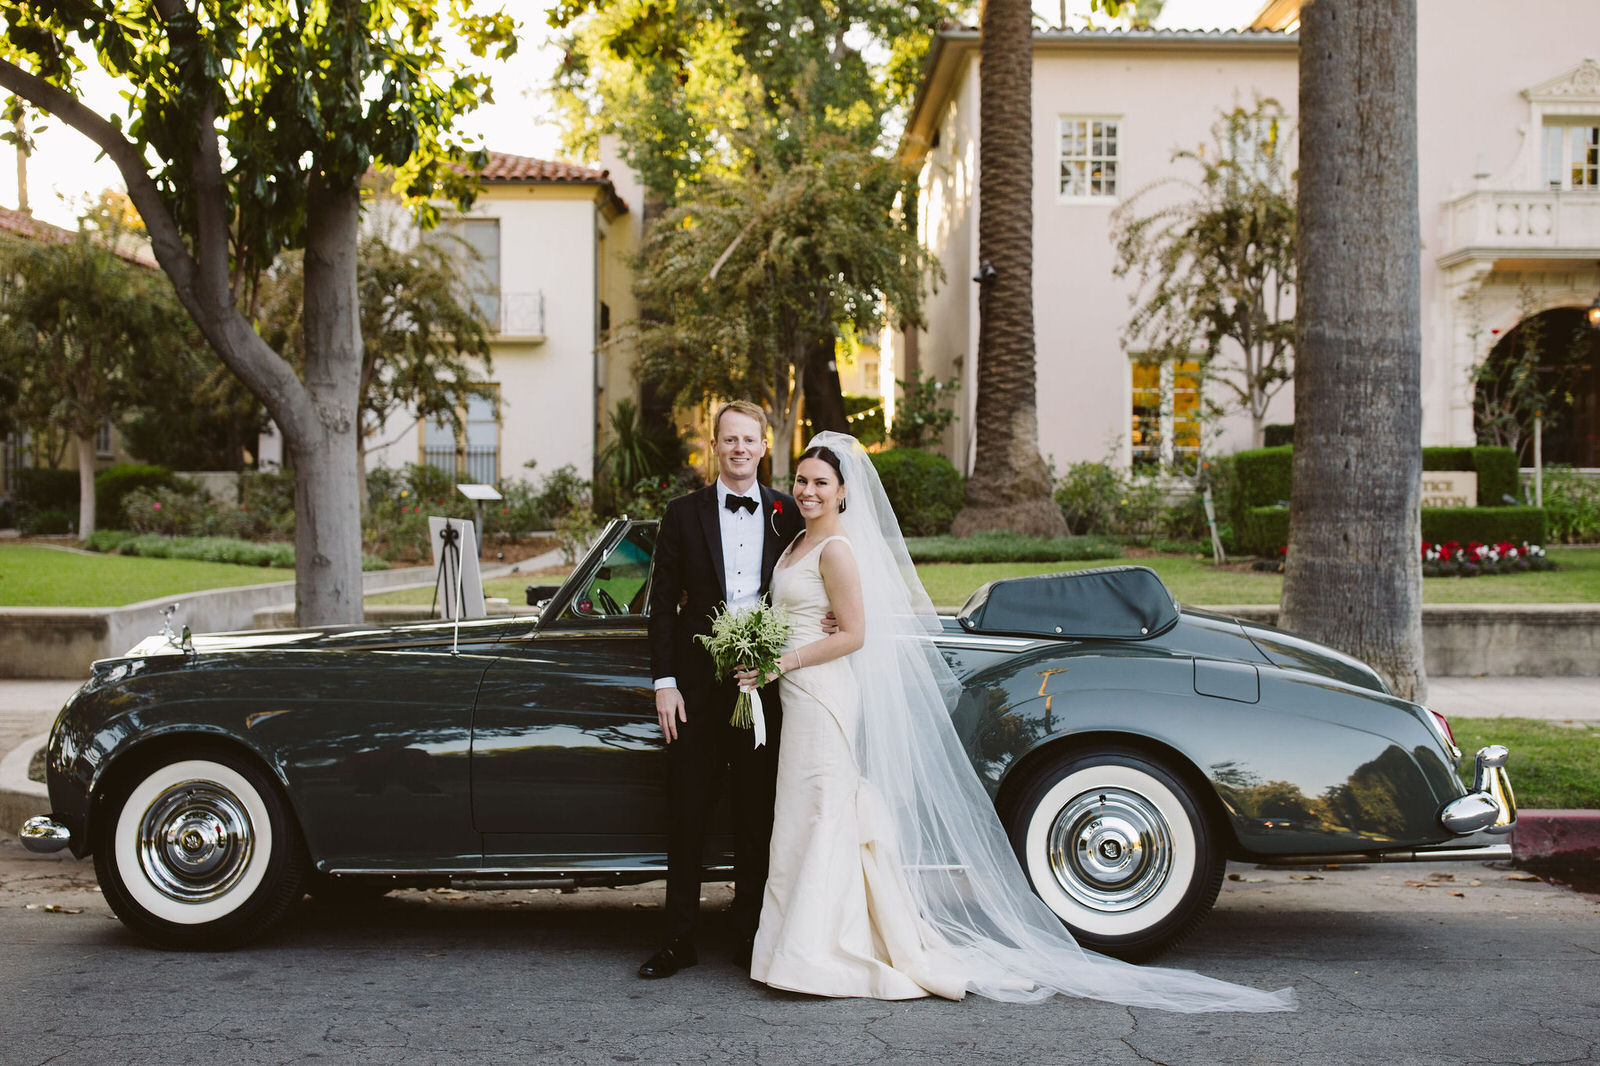 Shannon McNulty and Michael Lange's Wedding in California